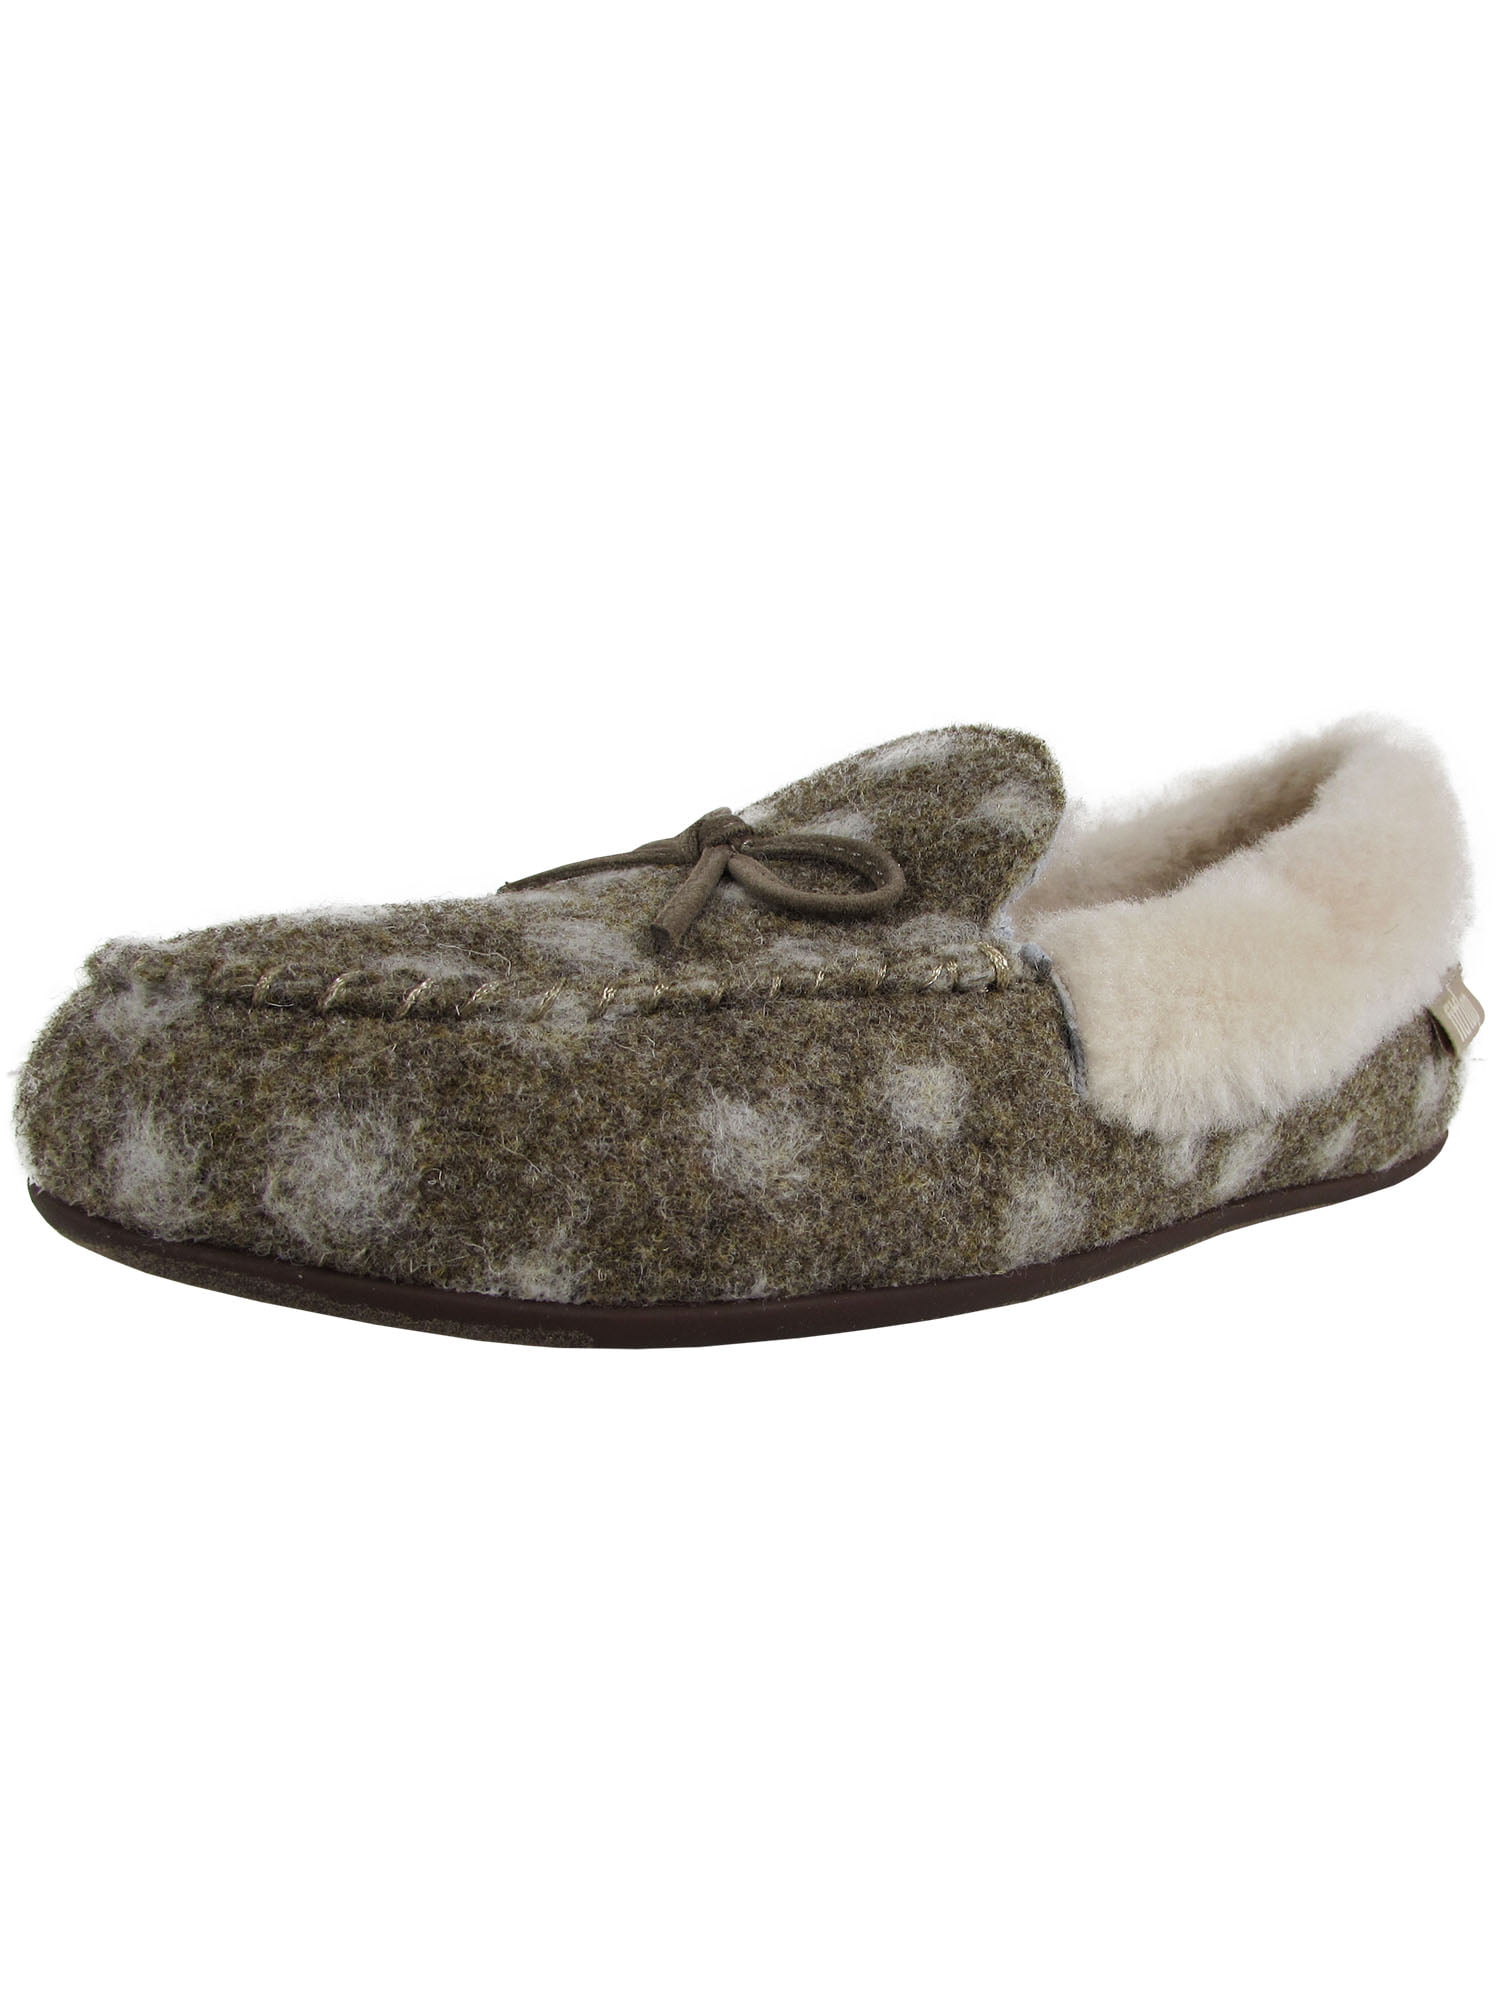 Fitflop Womens Clara Moccasin Dots Slipper Shoes, Taupe, US 5